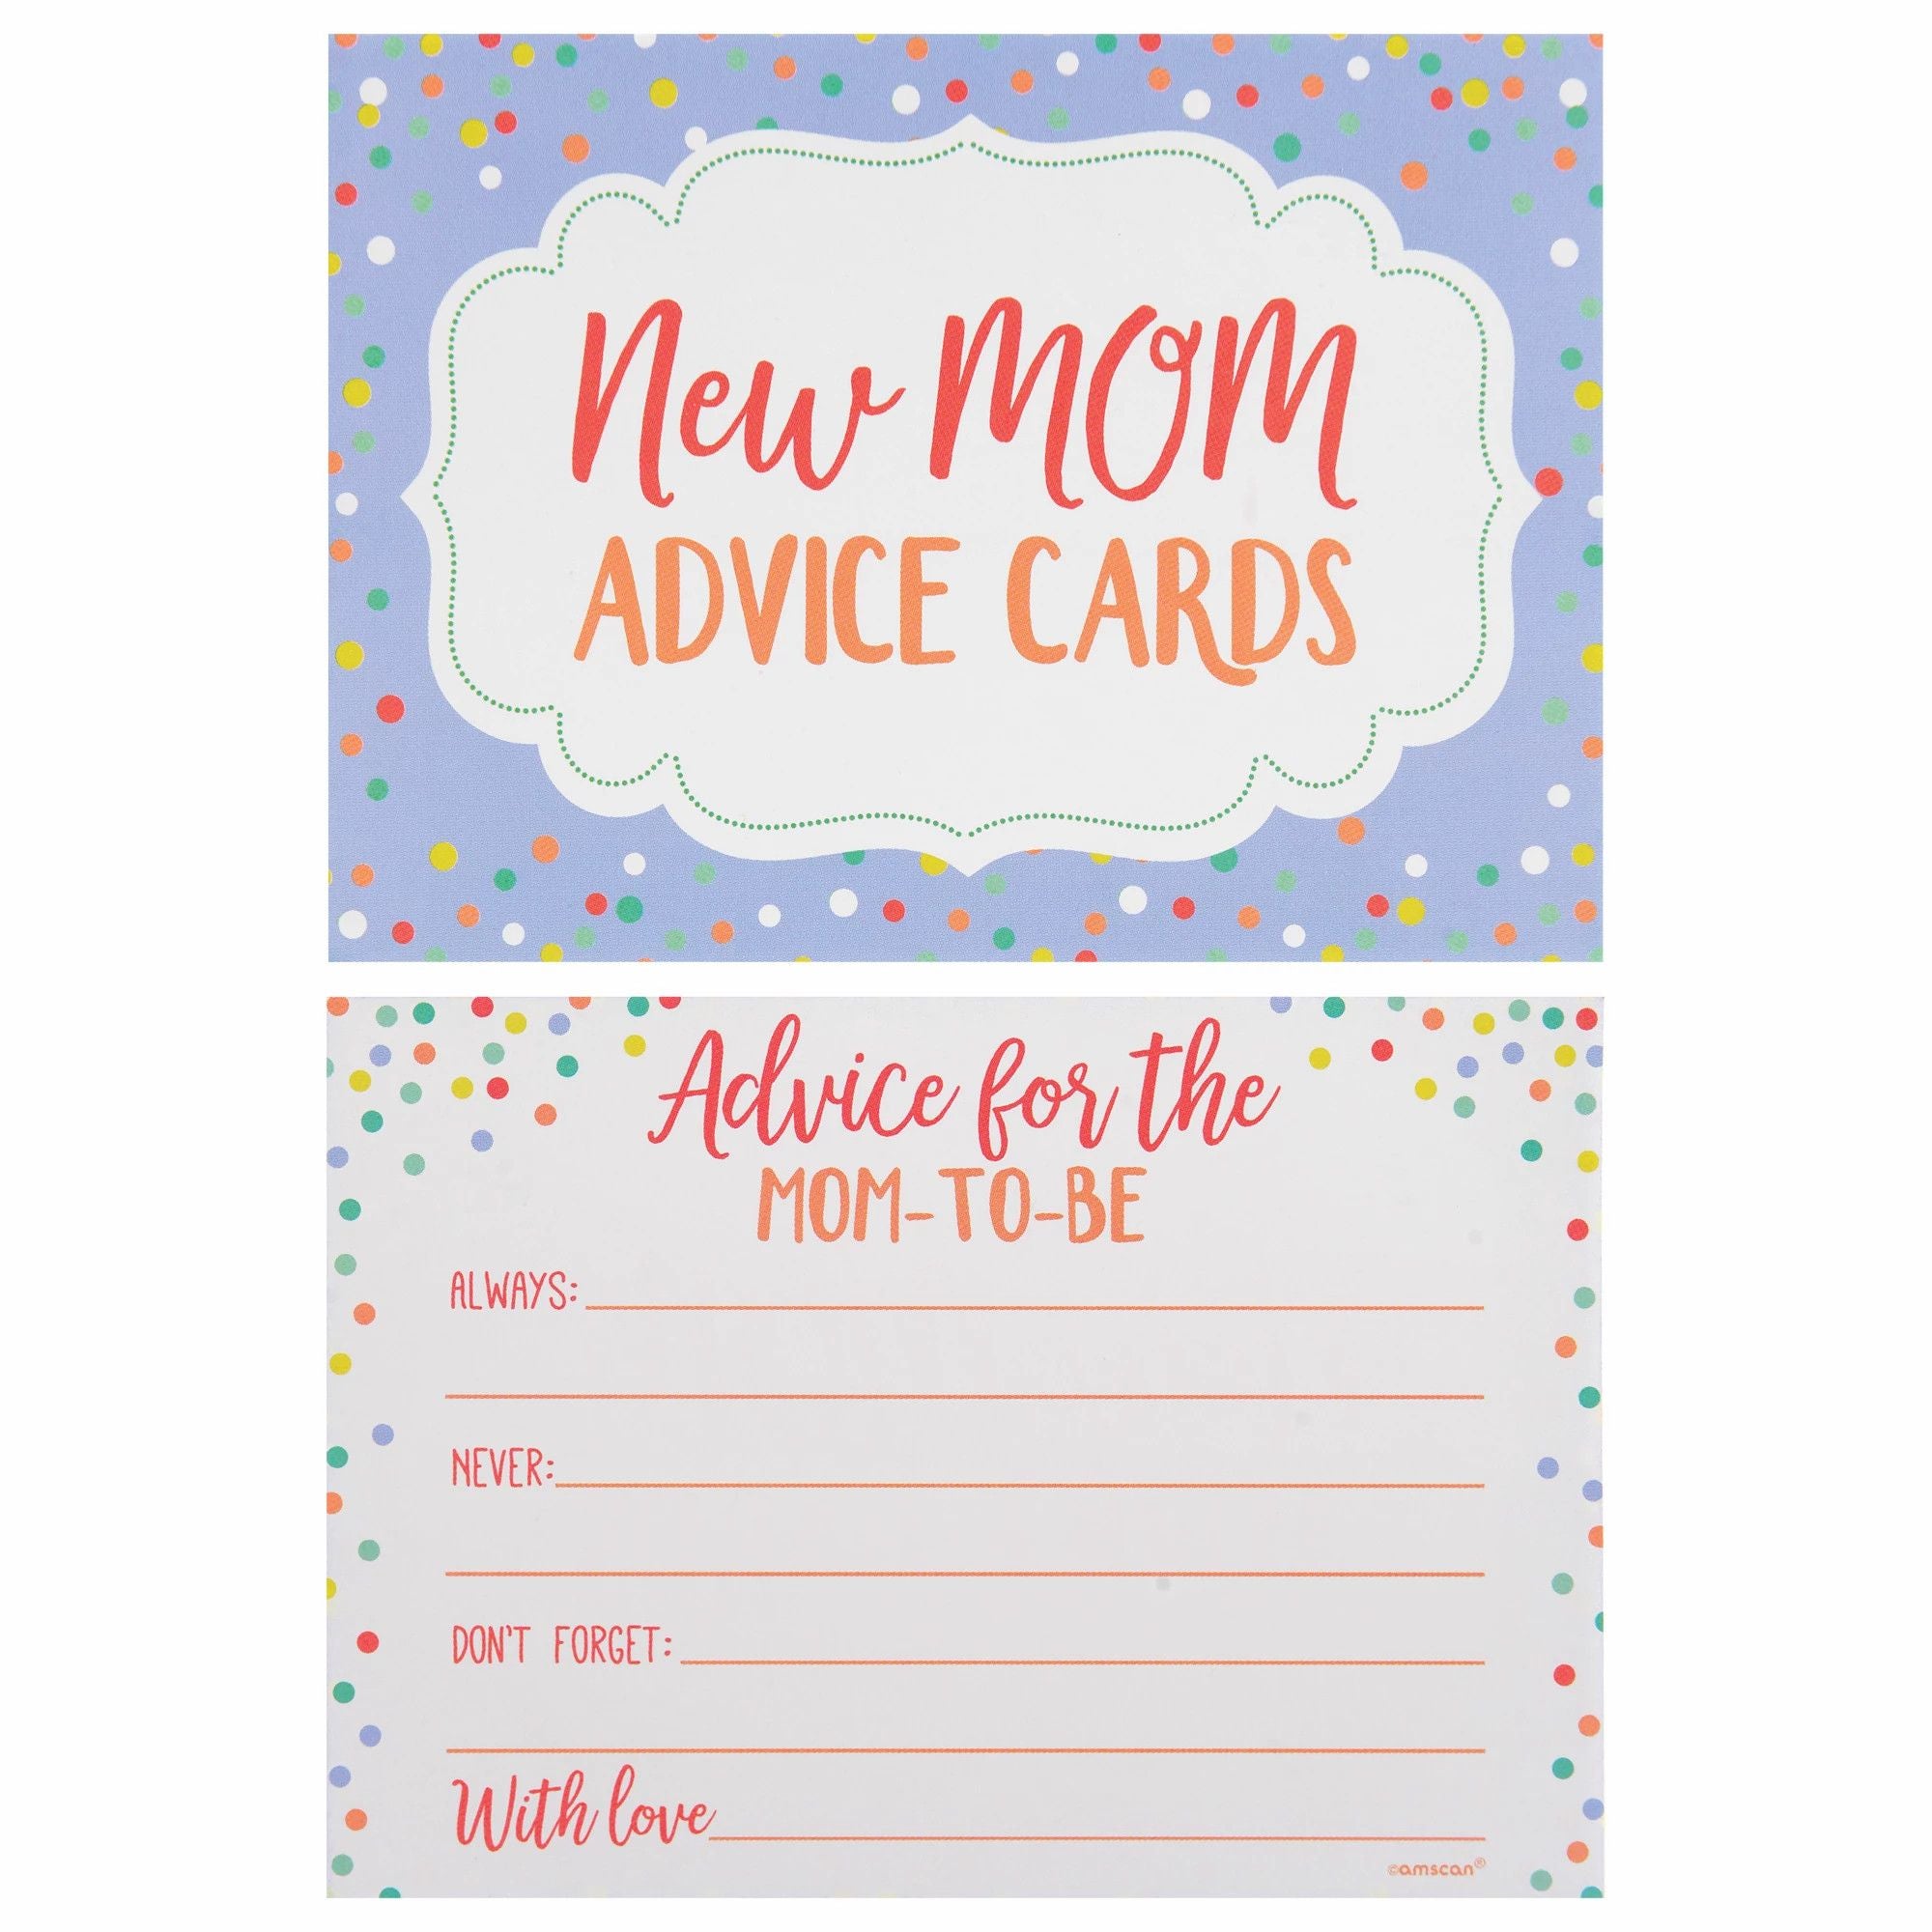 24 Advice Cards per Package